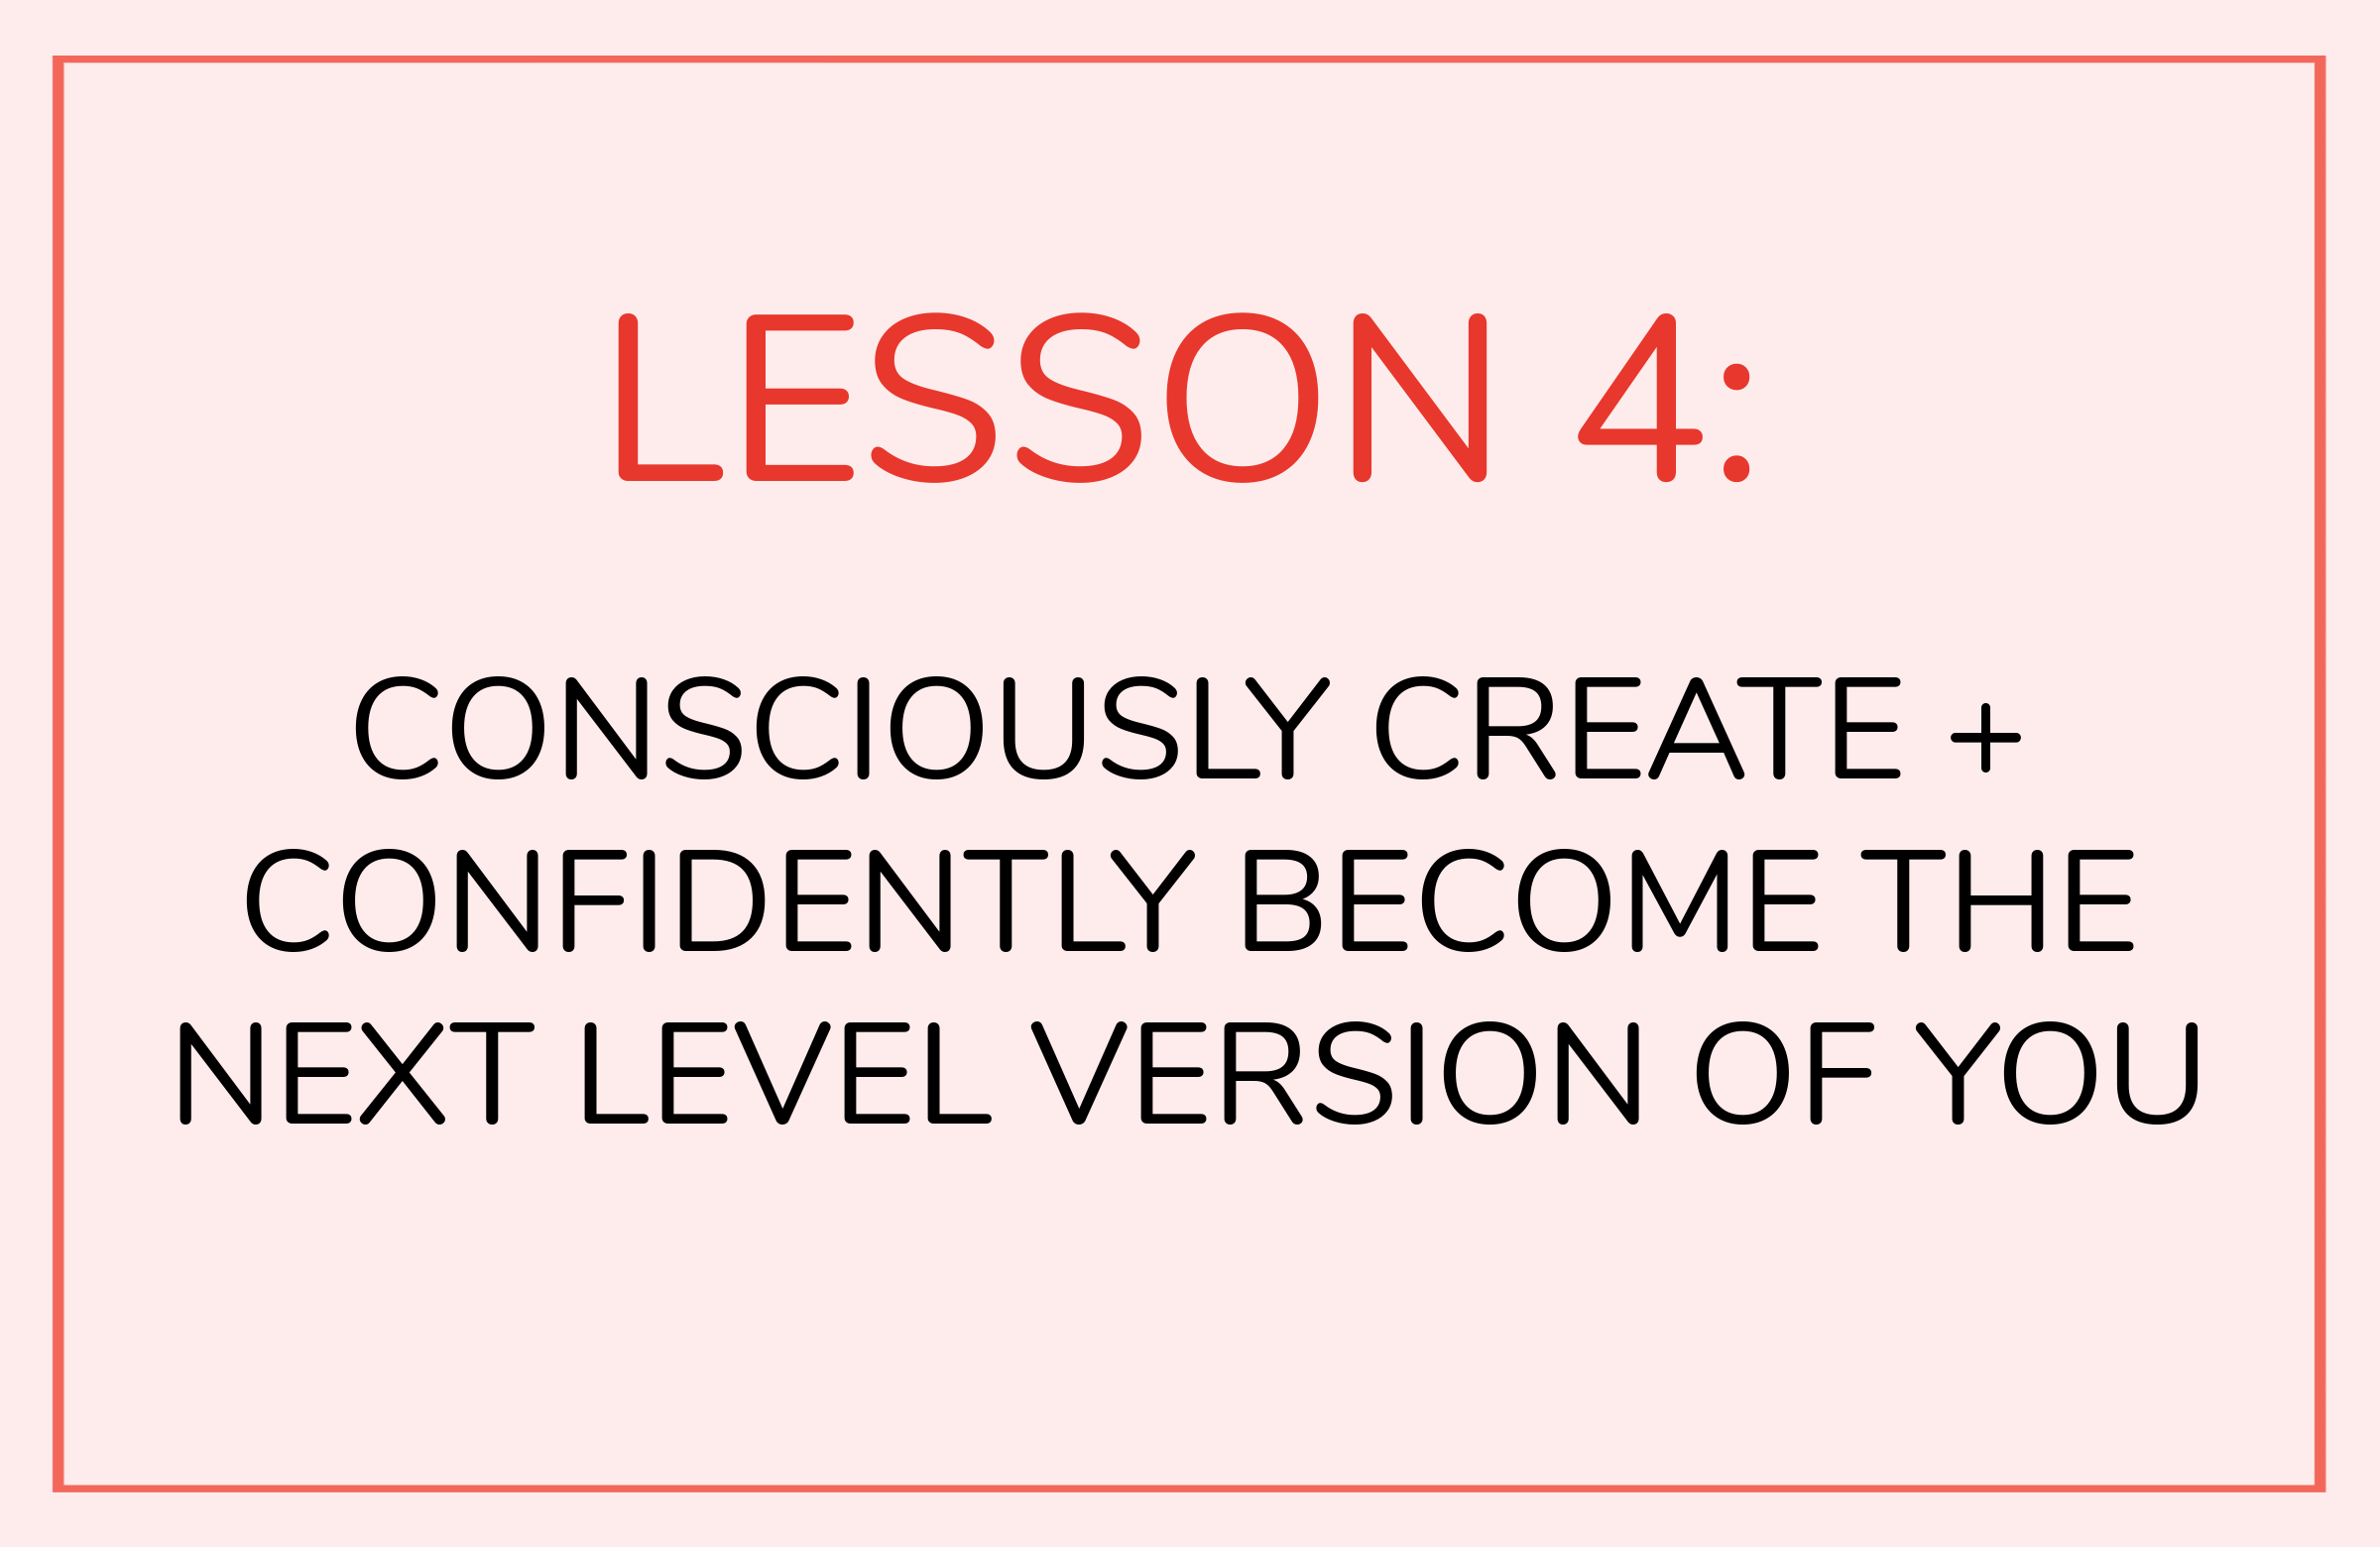 LESSON 4: Consciously create and confidently become the next level version of you